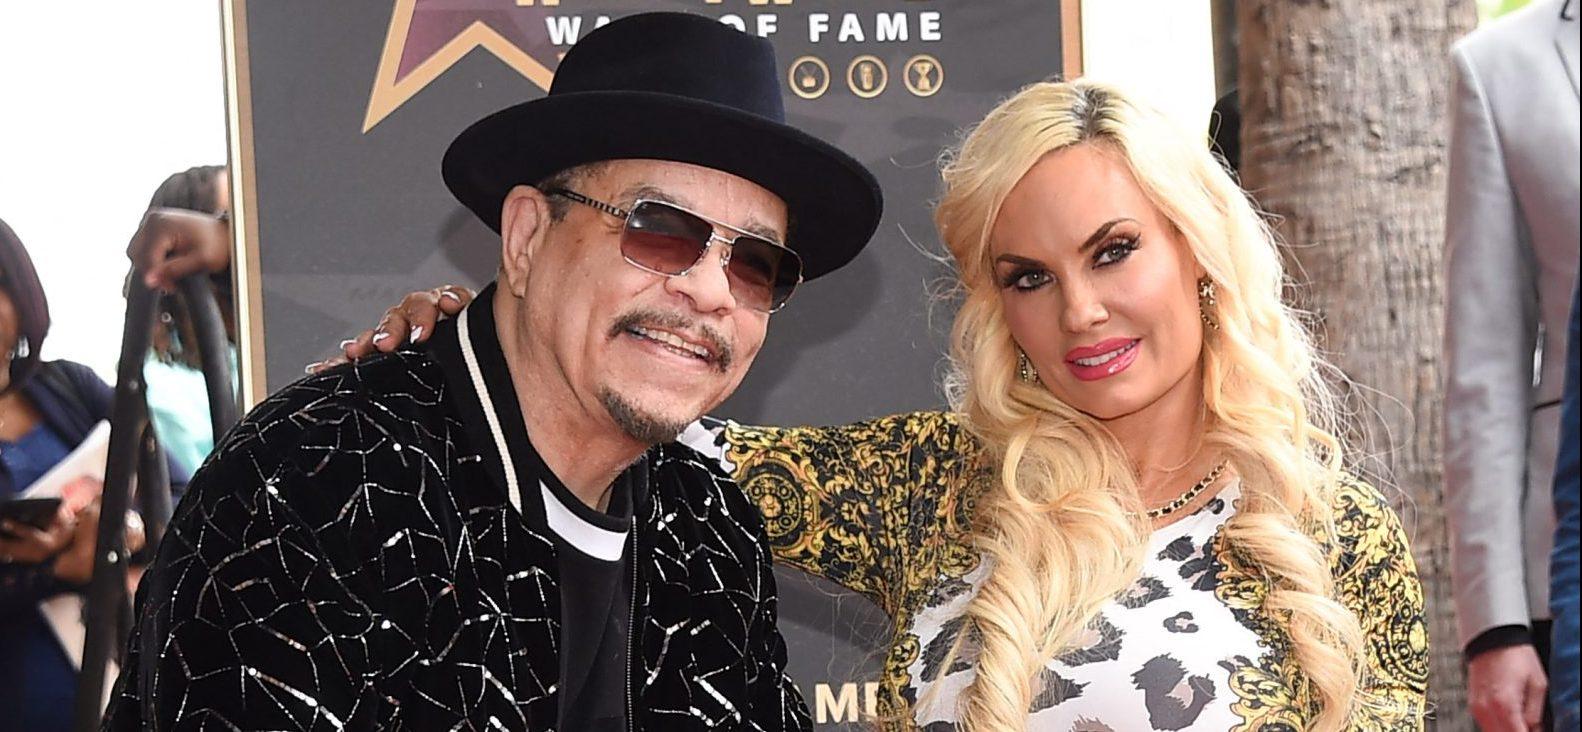 Ice-T Opens Up About Having Another Baby With Wife Coco Austin